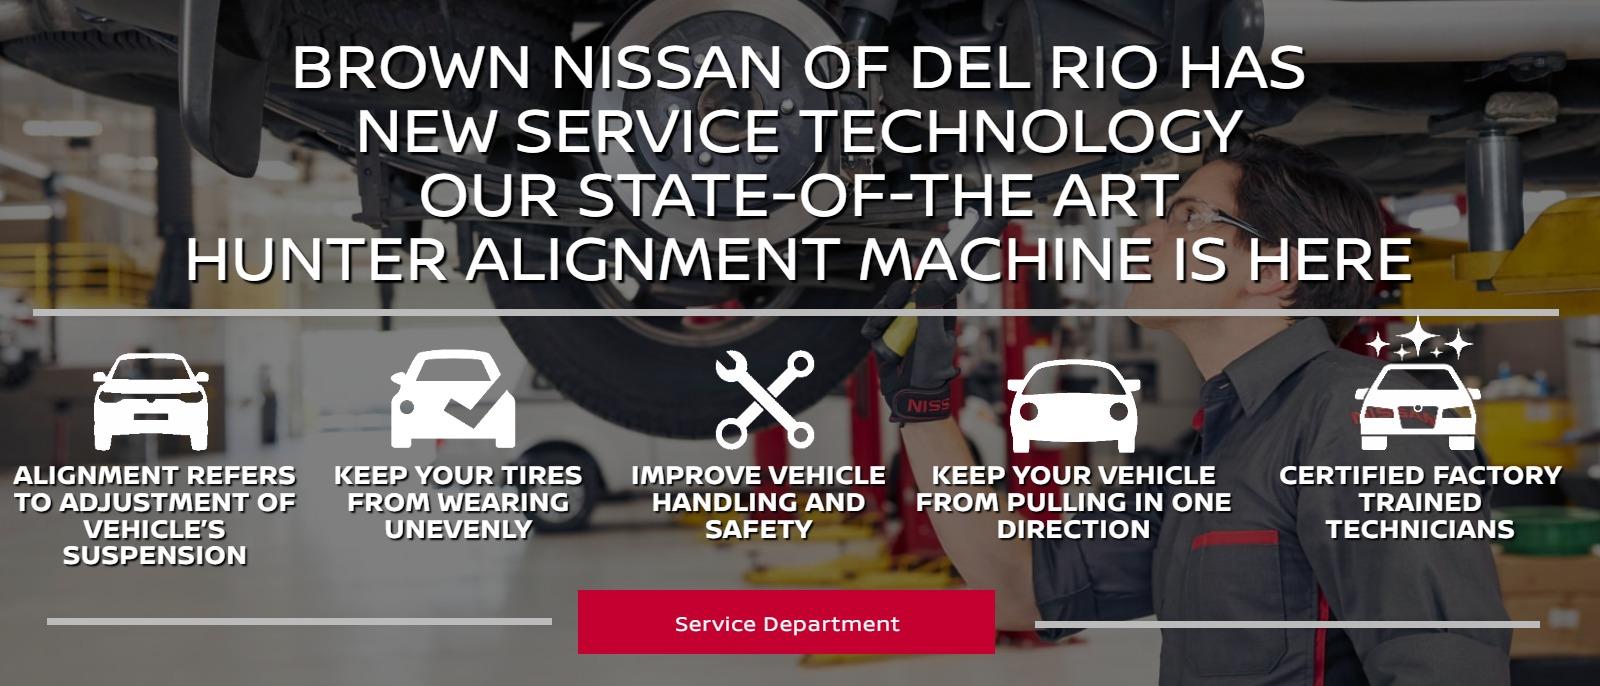 BROWN NISSAN OF DEL RIO HAS NEW SERVICE TECHNOLOGY
OUR STATE-OF-THE ART HUNTER ALIGNMENT MACHINE IS HERE
• Alignment refers to adjustment of vehicle’s suspension
• Help your tires work properly
• Improve vehicle handling
• Keep your vehicle from pulling in one direction
• Trust our collision center experts